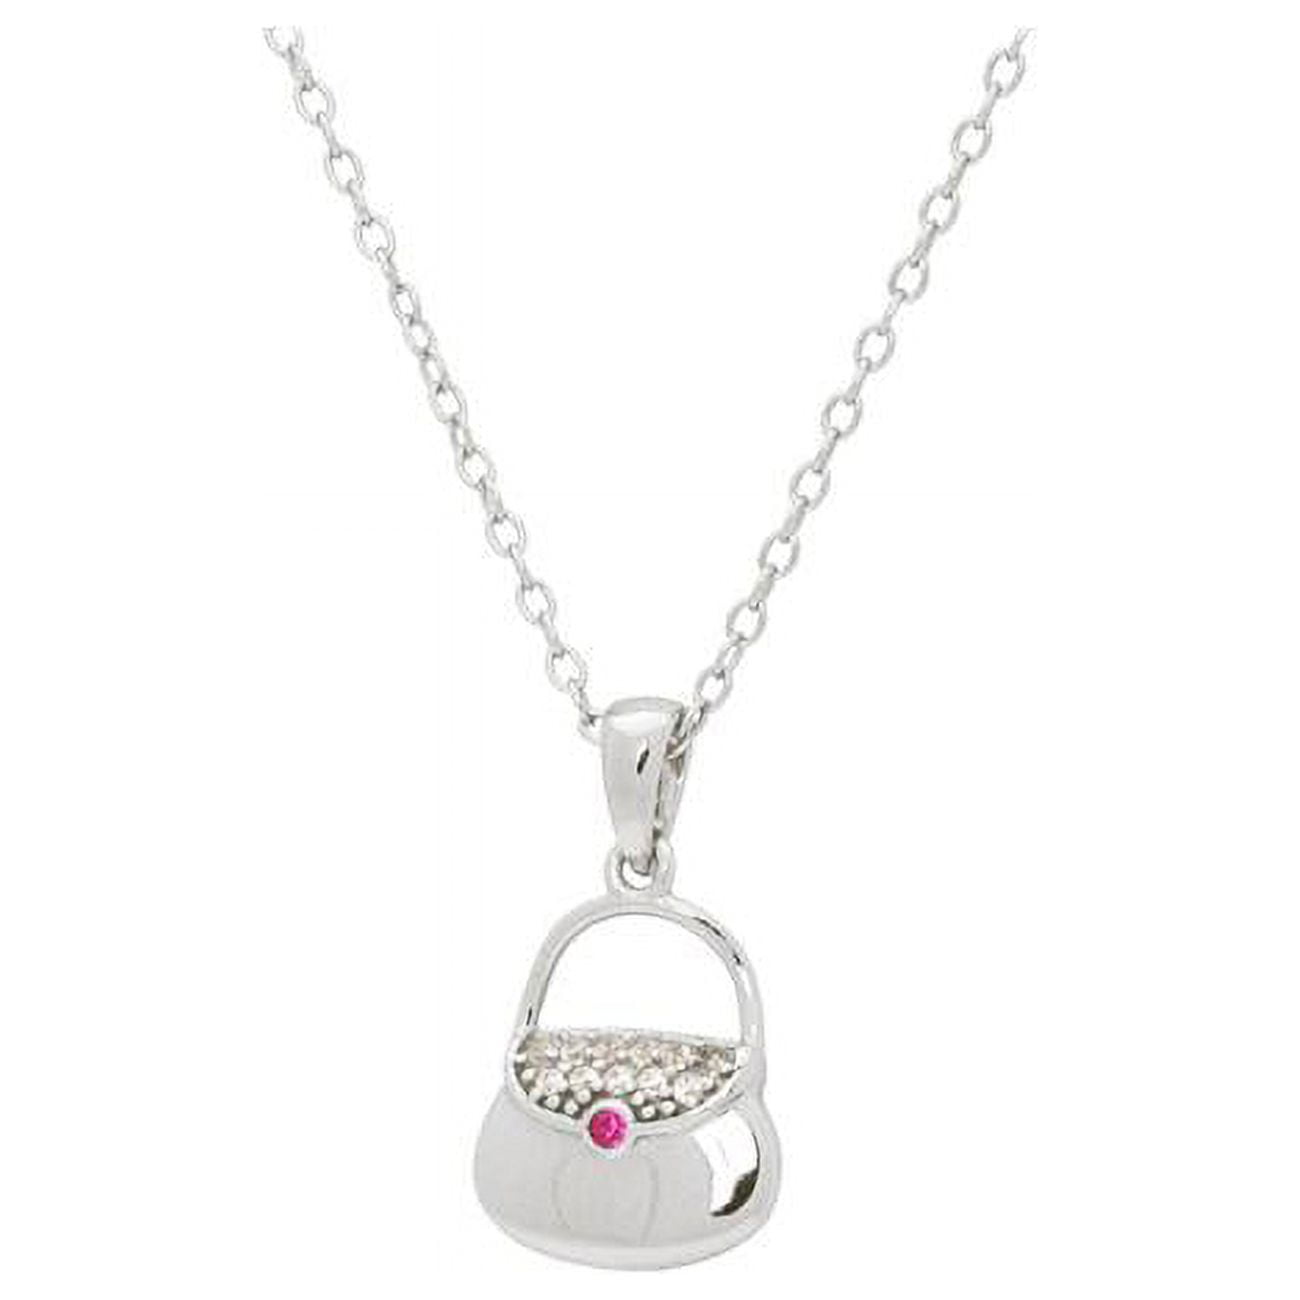 111201 16 & 2 In. Teen Red Cz Purse Pendant Necklace In Sterling Silver